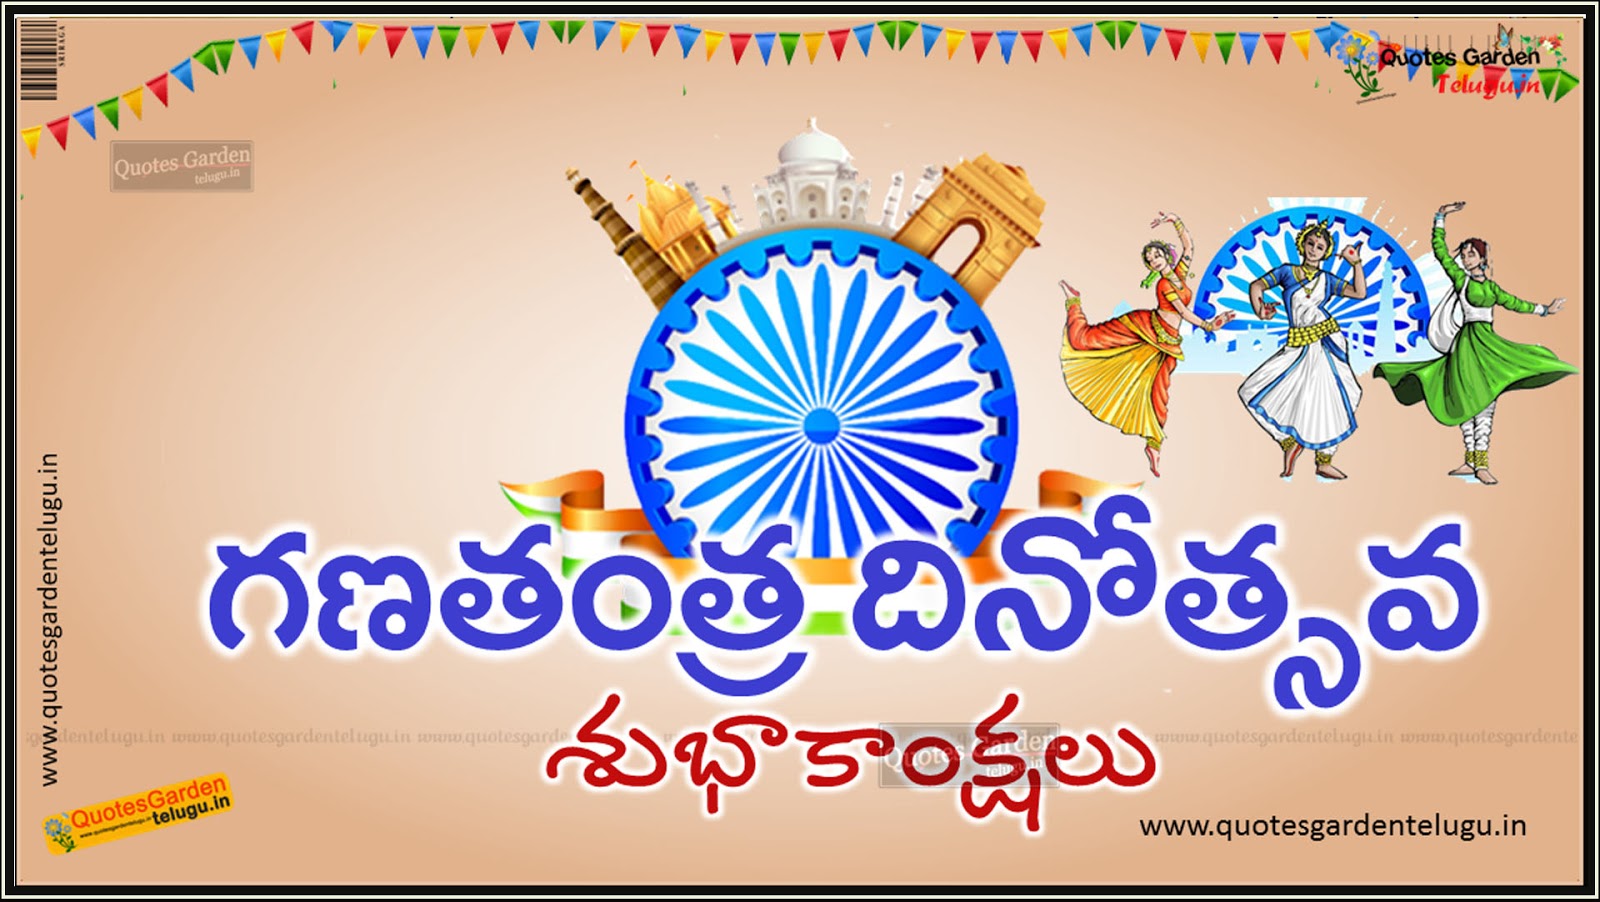 Republicday images hd telugu wishes messages | QUOTES GARDEN ...